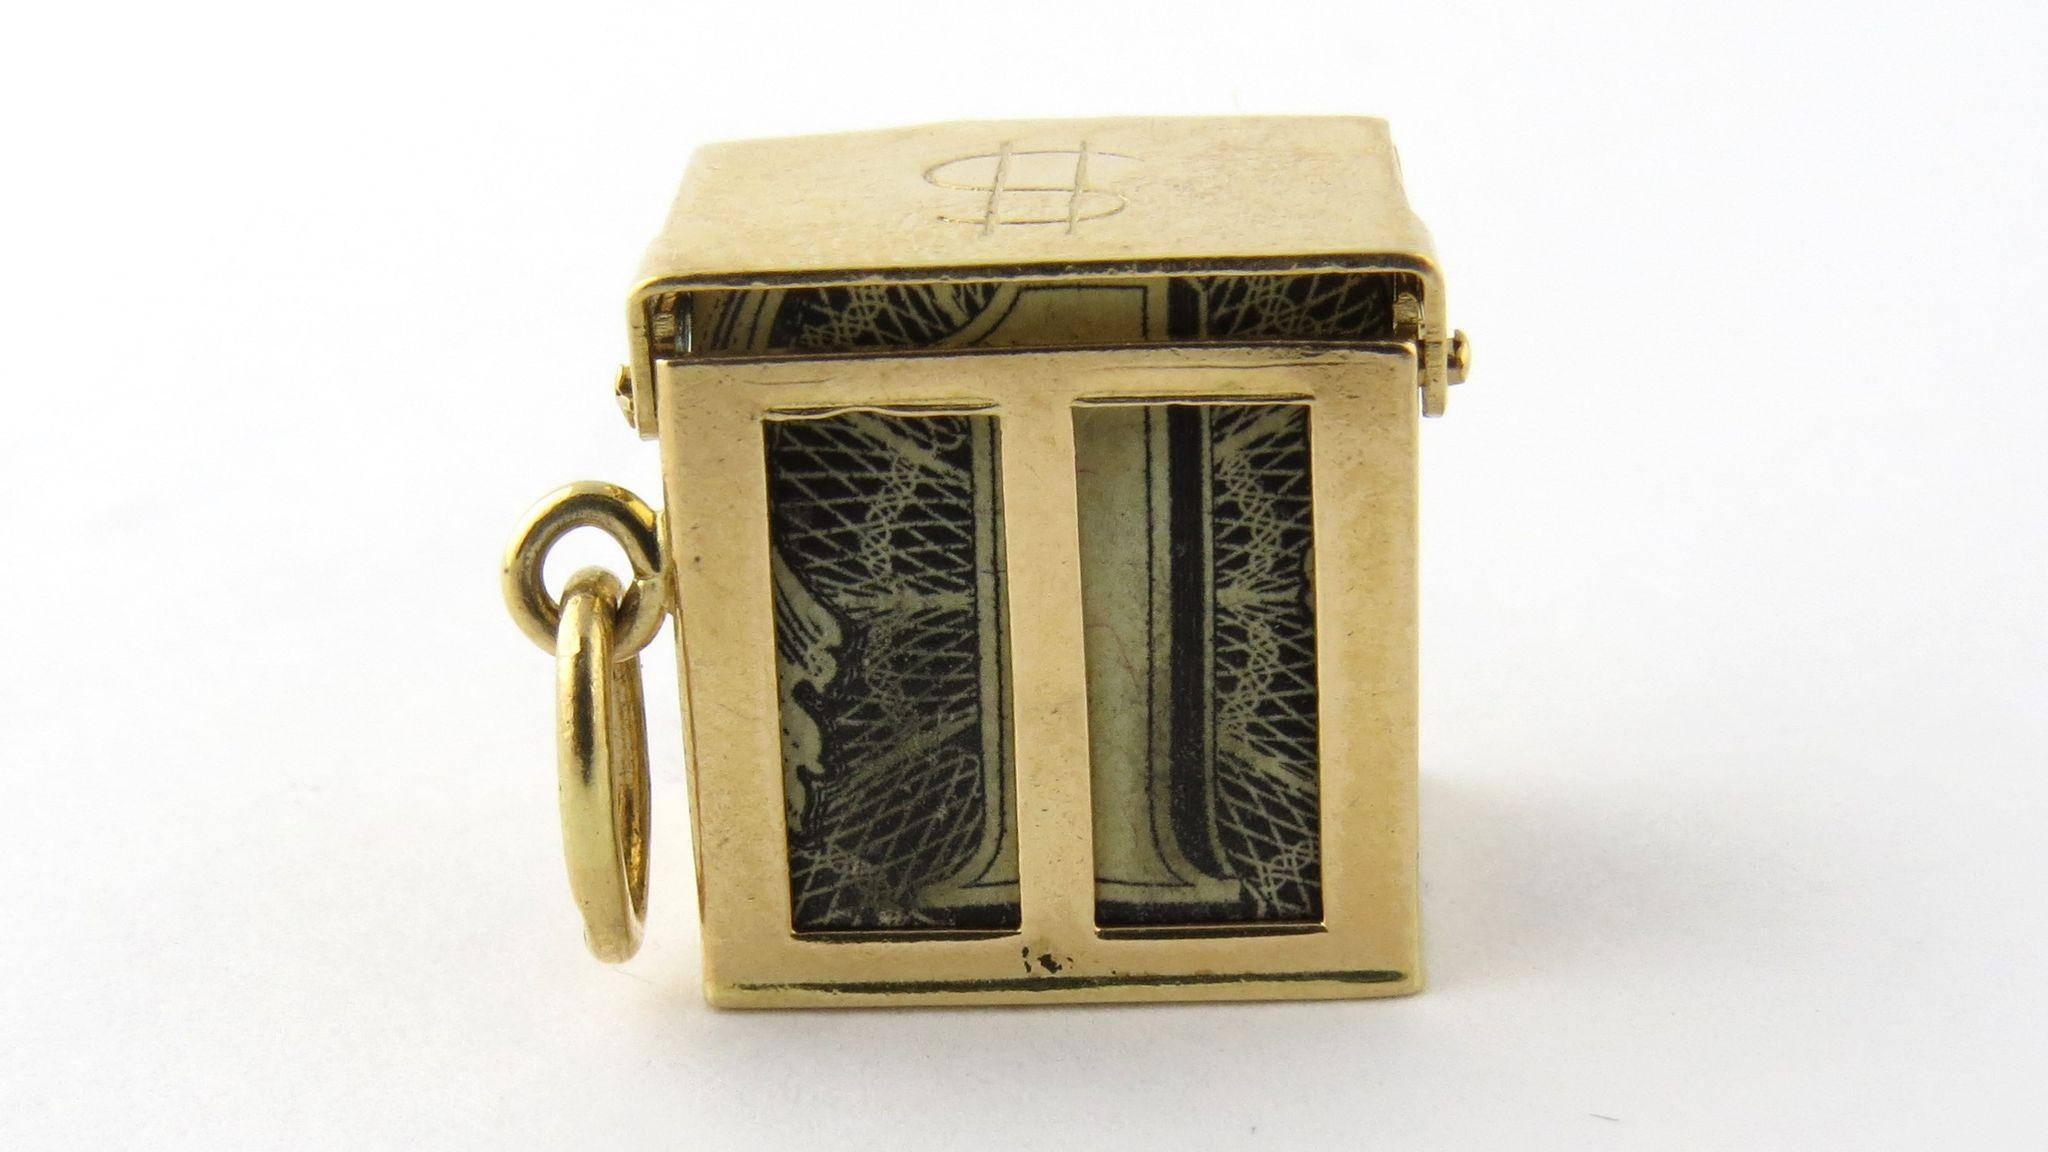 Vintage 14K yellow gold mad money charm. 

Accordion folded United States $1 filled gold charm will get you out of any monetary jam! Open on all sides with lifting latched top and $ sign engraved. 

Marked: 14K Measures: 13mm squared. Weighs: 3.5g,